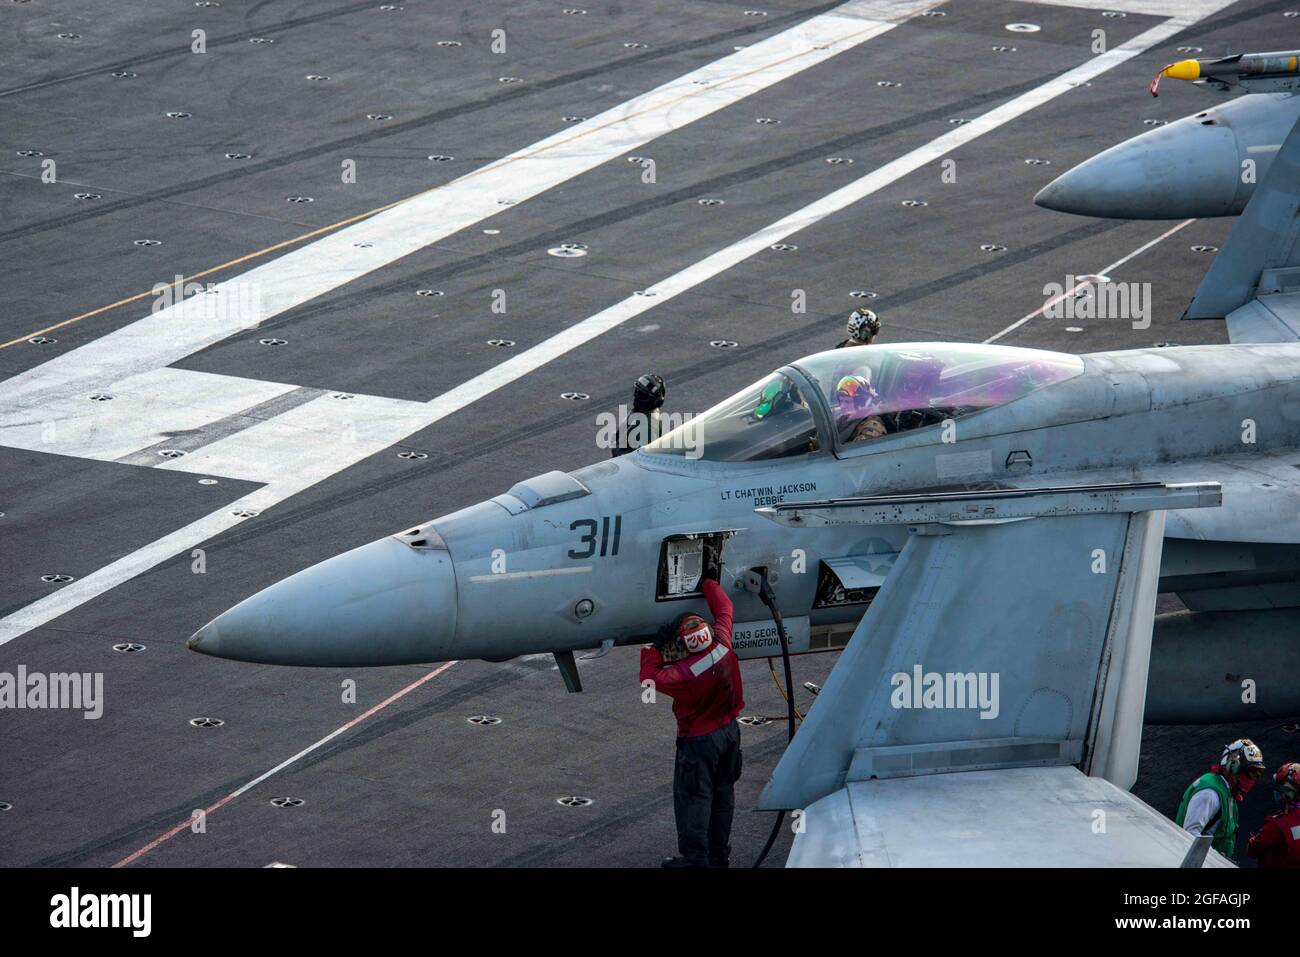 Arabian Sea, United States. 24th Aug, 2021. U.S. Navy sailors prepare a F/A-18E Super Hornet fighter jet, attached to the Eagles of Strike Fighter Squadron 115, for take off on the flight deck of aircraft carrier USS Ronald Reagan August 24, 2021 in the Arabian Sea. Credit: Planetpix/Alamy Live News Stock Photo